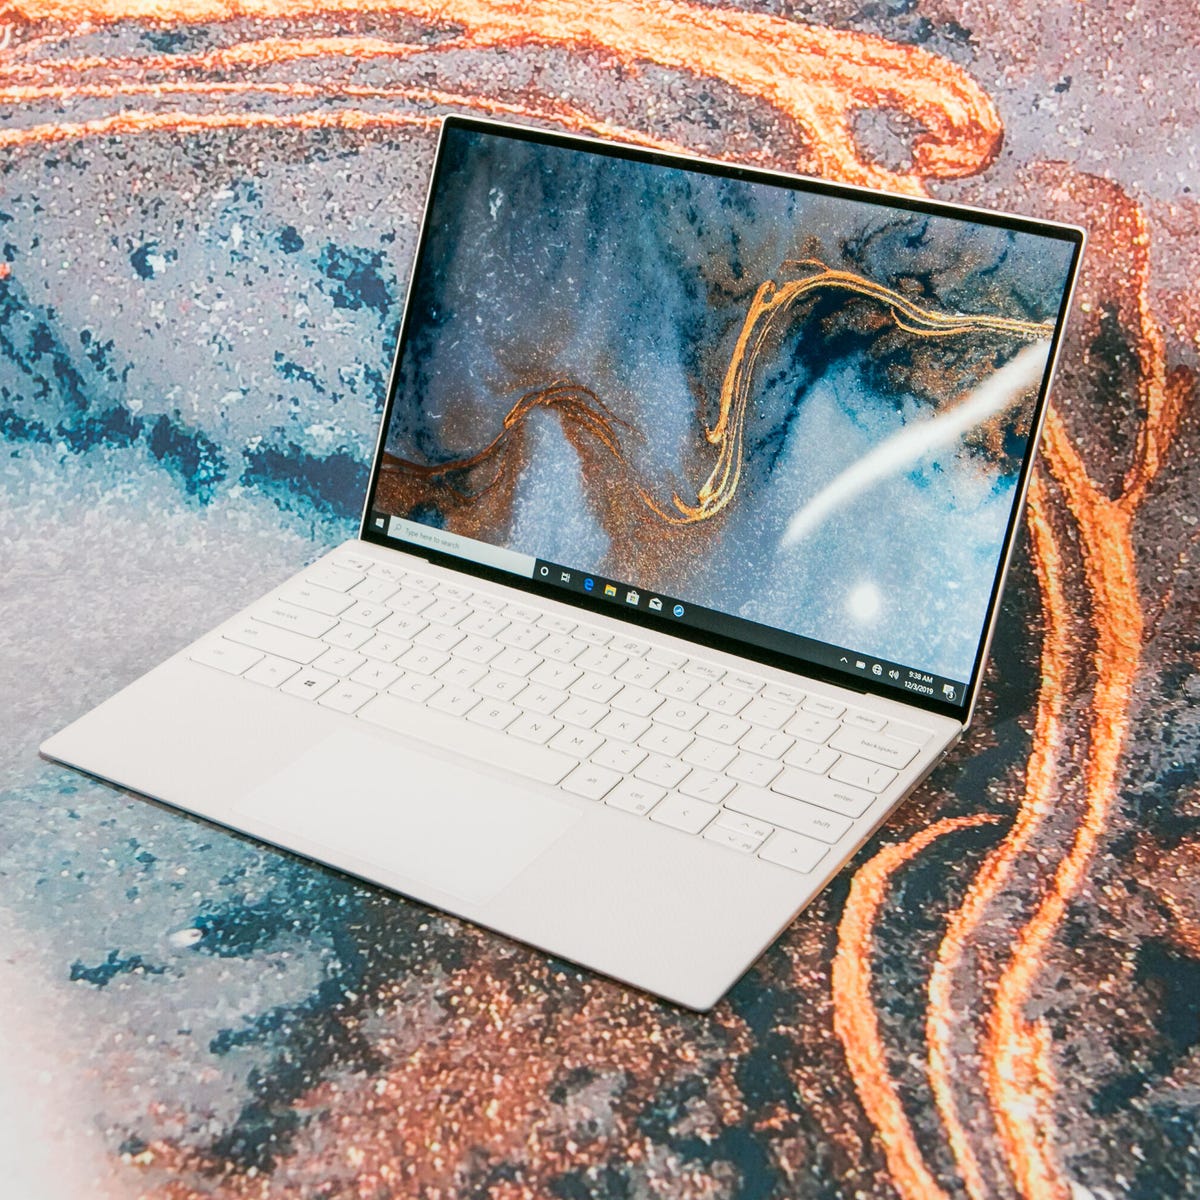 Dell XPS 13 review: Tiny tweaks to a long-time favorite - CNET